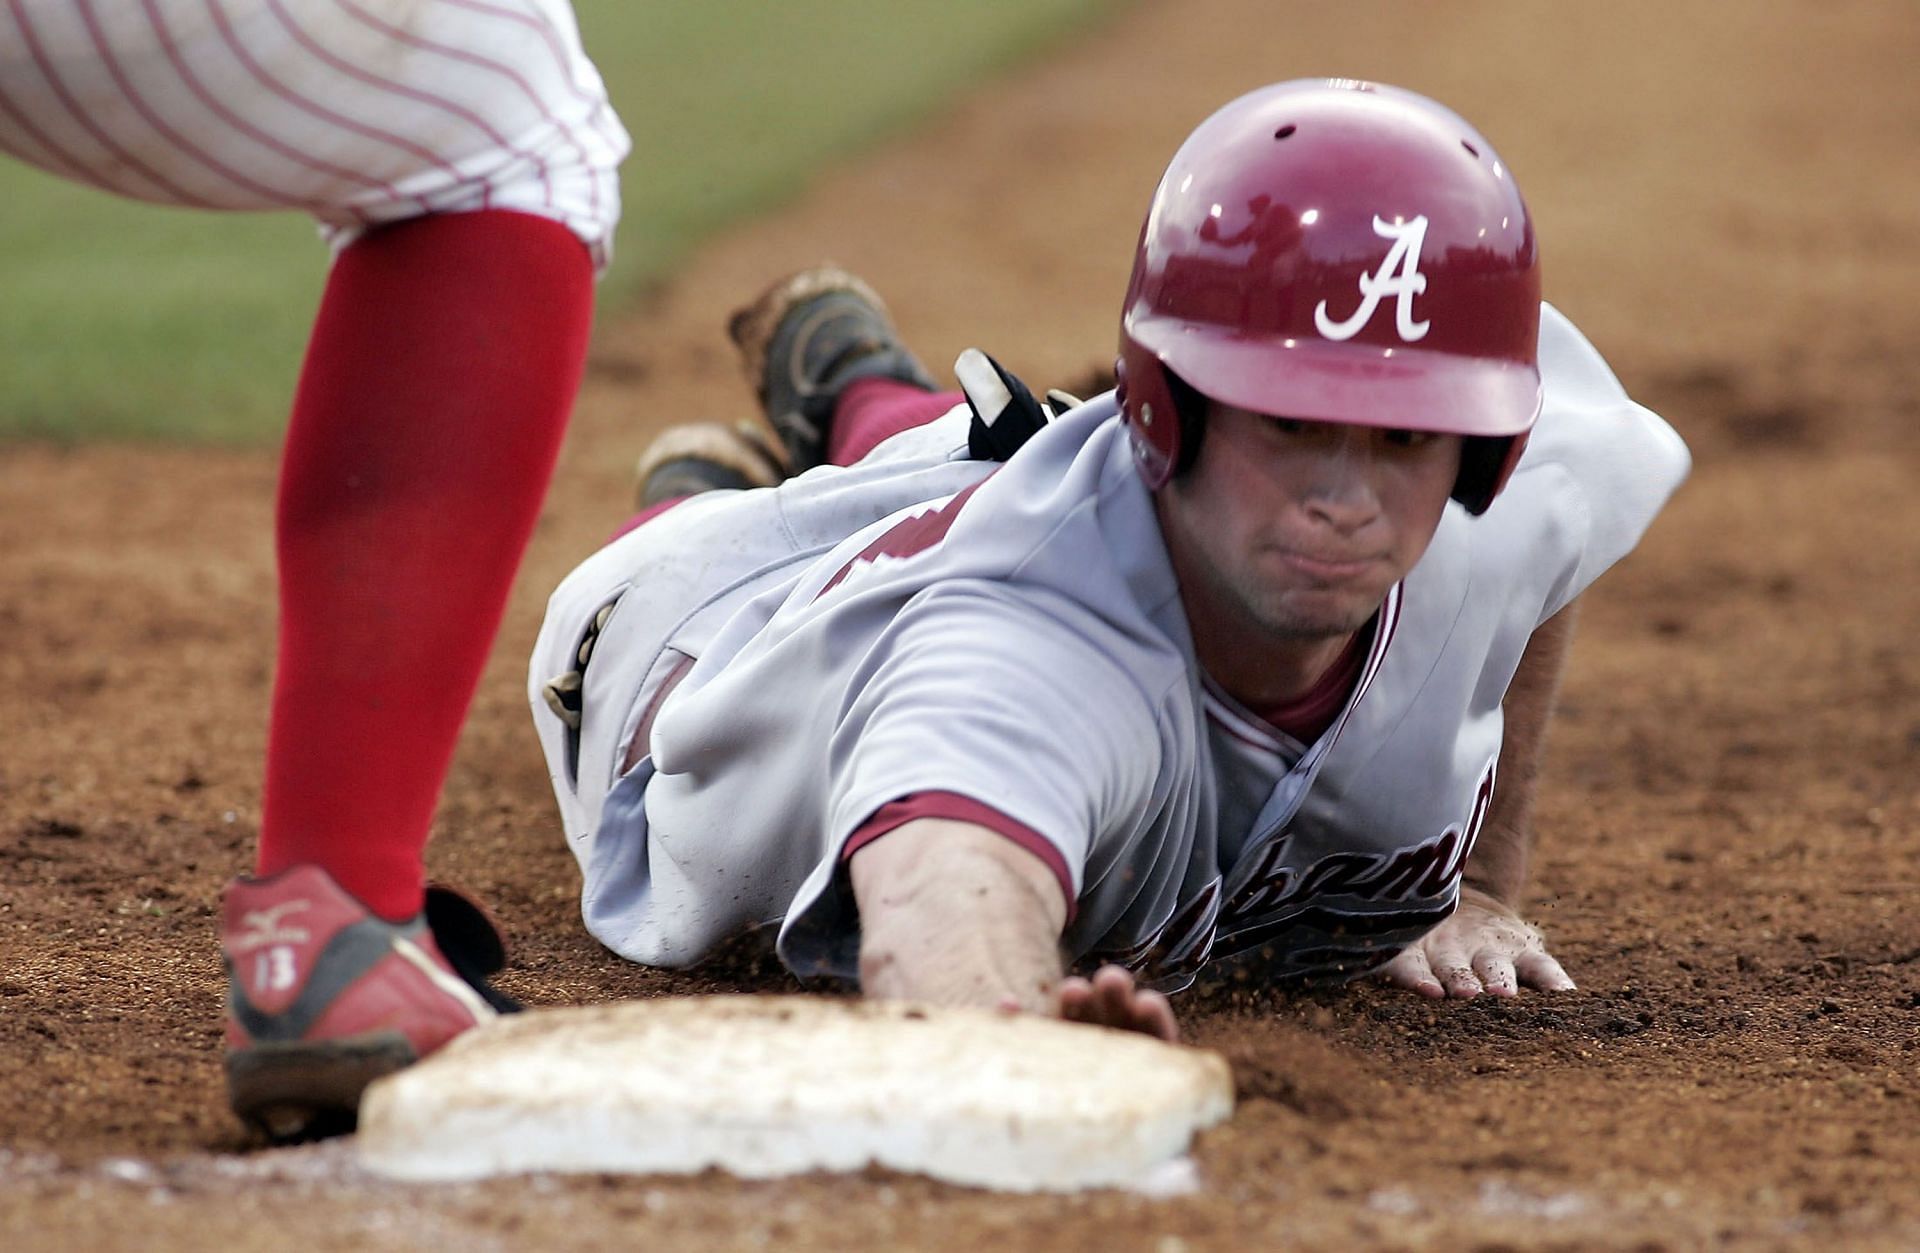 Roster movement for Alabama baseball continues - WVUA 23